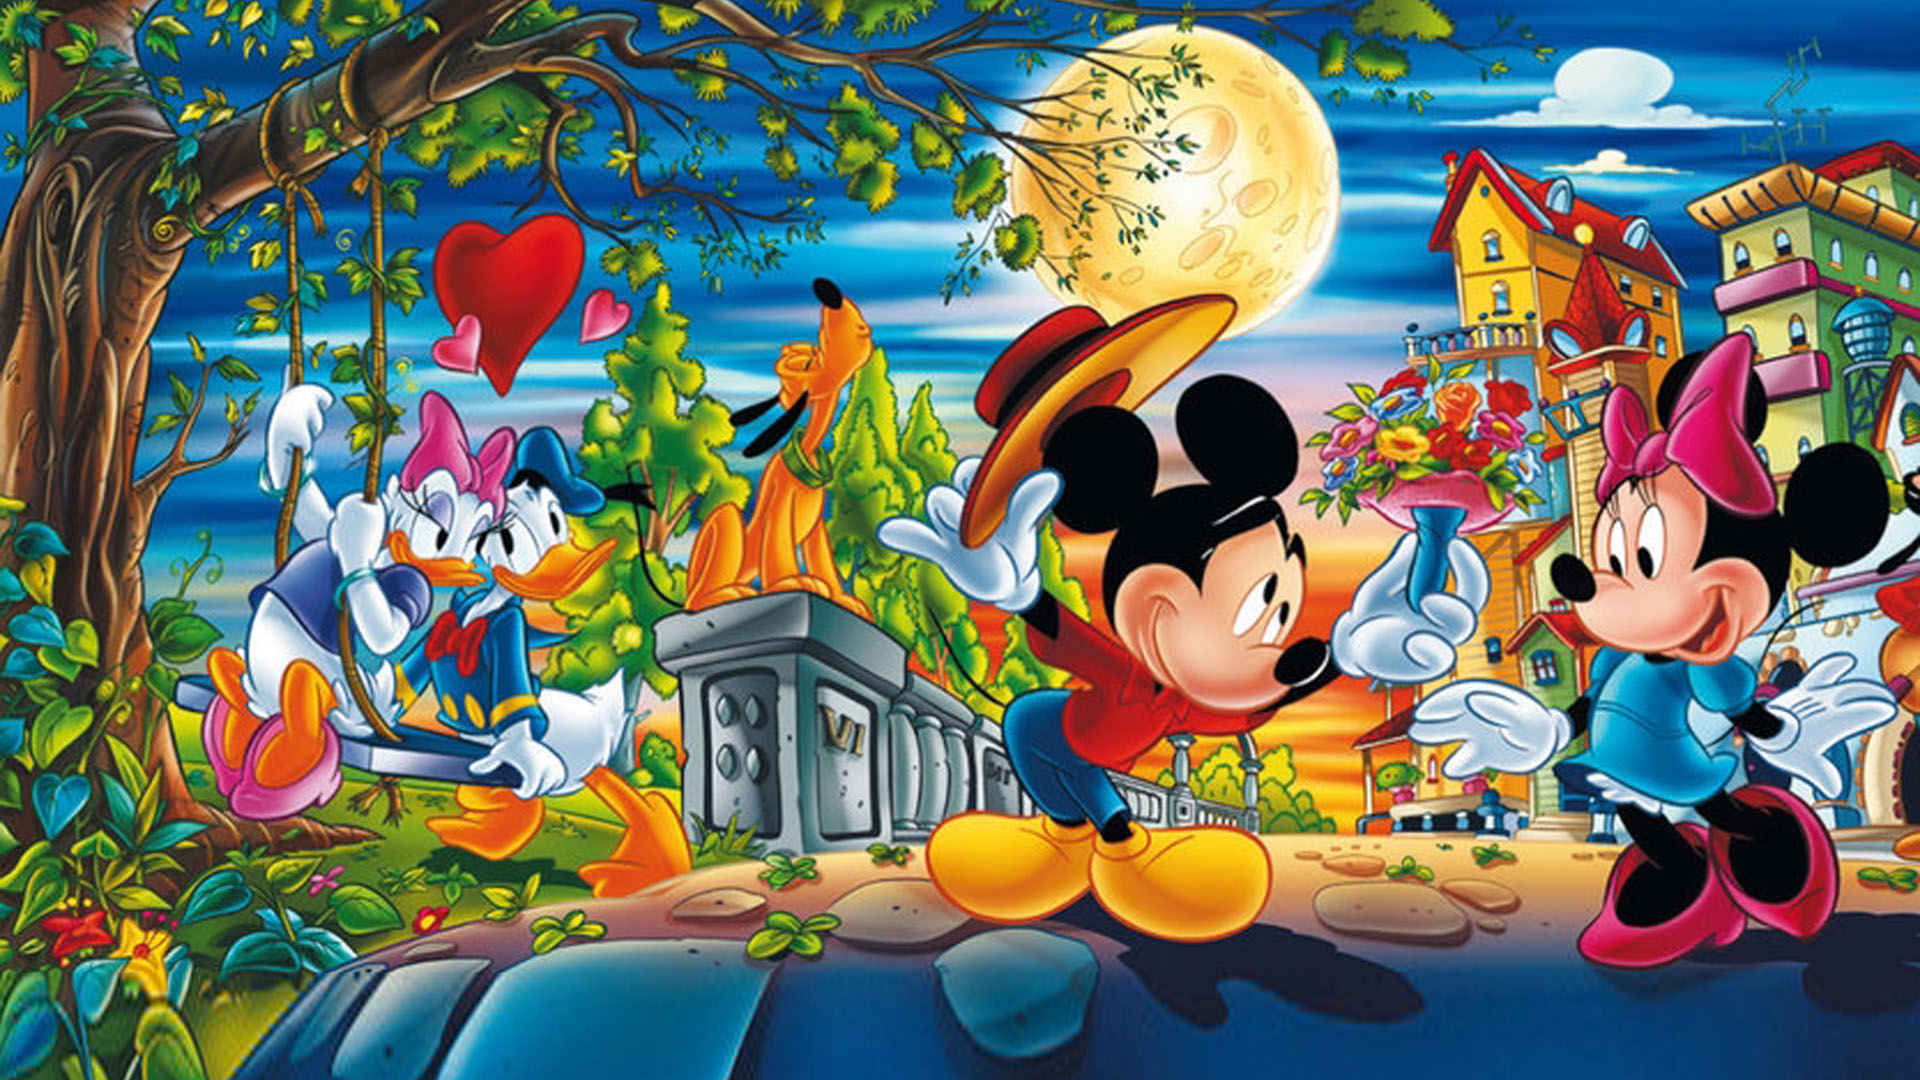 Valentine Day Cartoons Mickey With Minnie Mouse And Donald With Daisy Duck Disney...